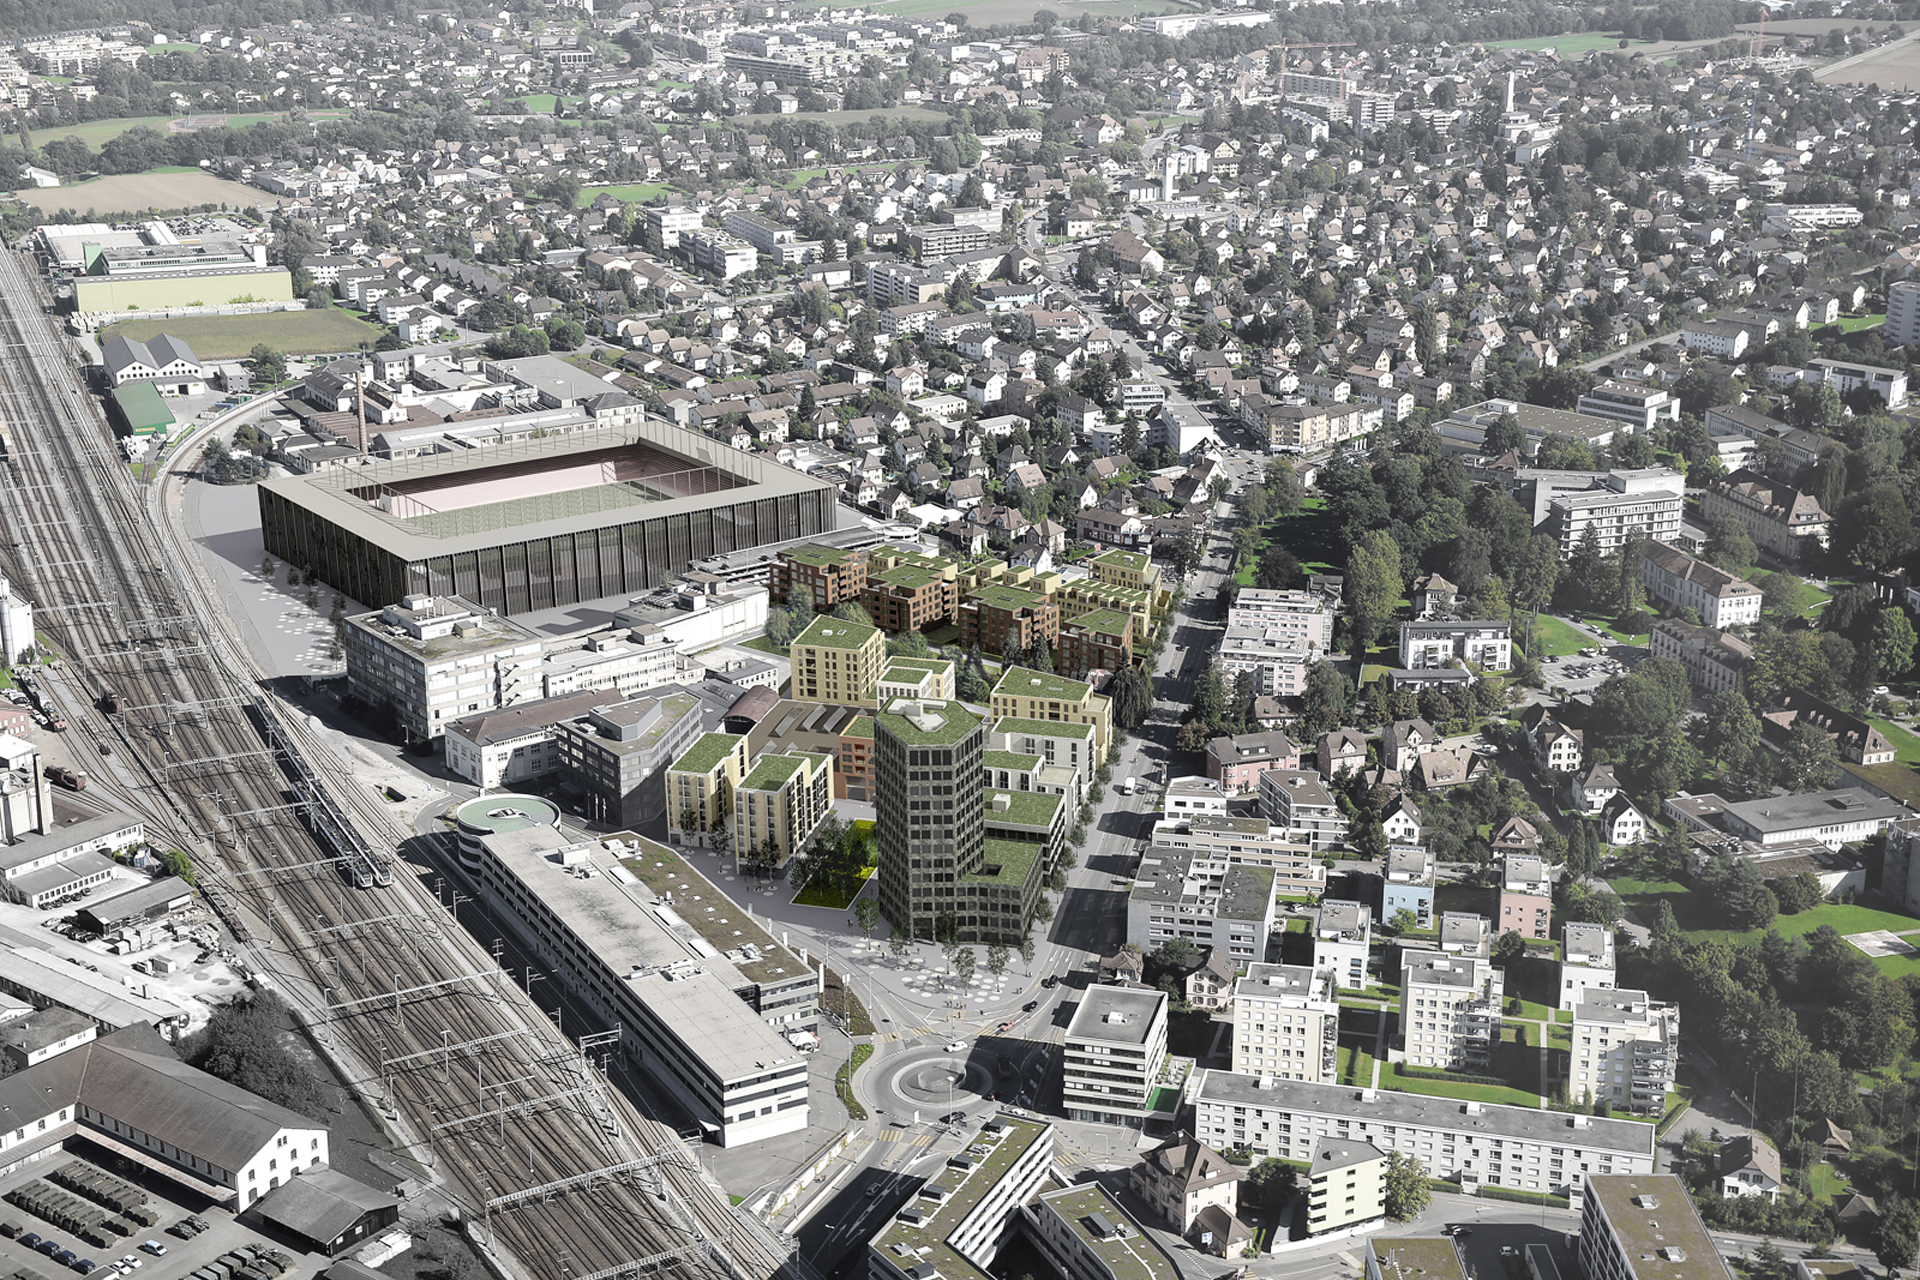 The Aeschbach quarter in the context between the garden quarter and commercial zone in Aarau